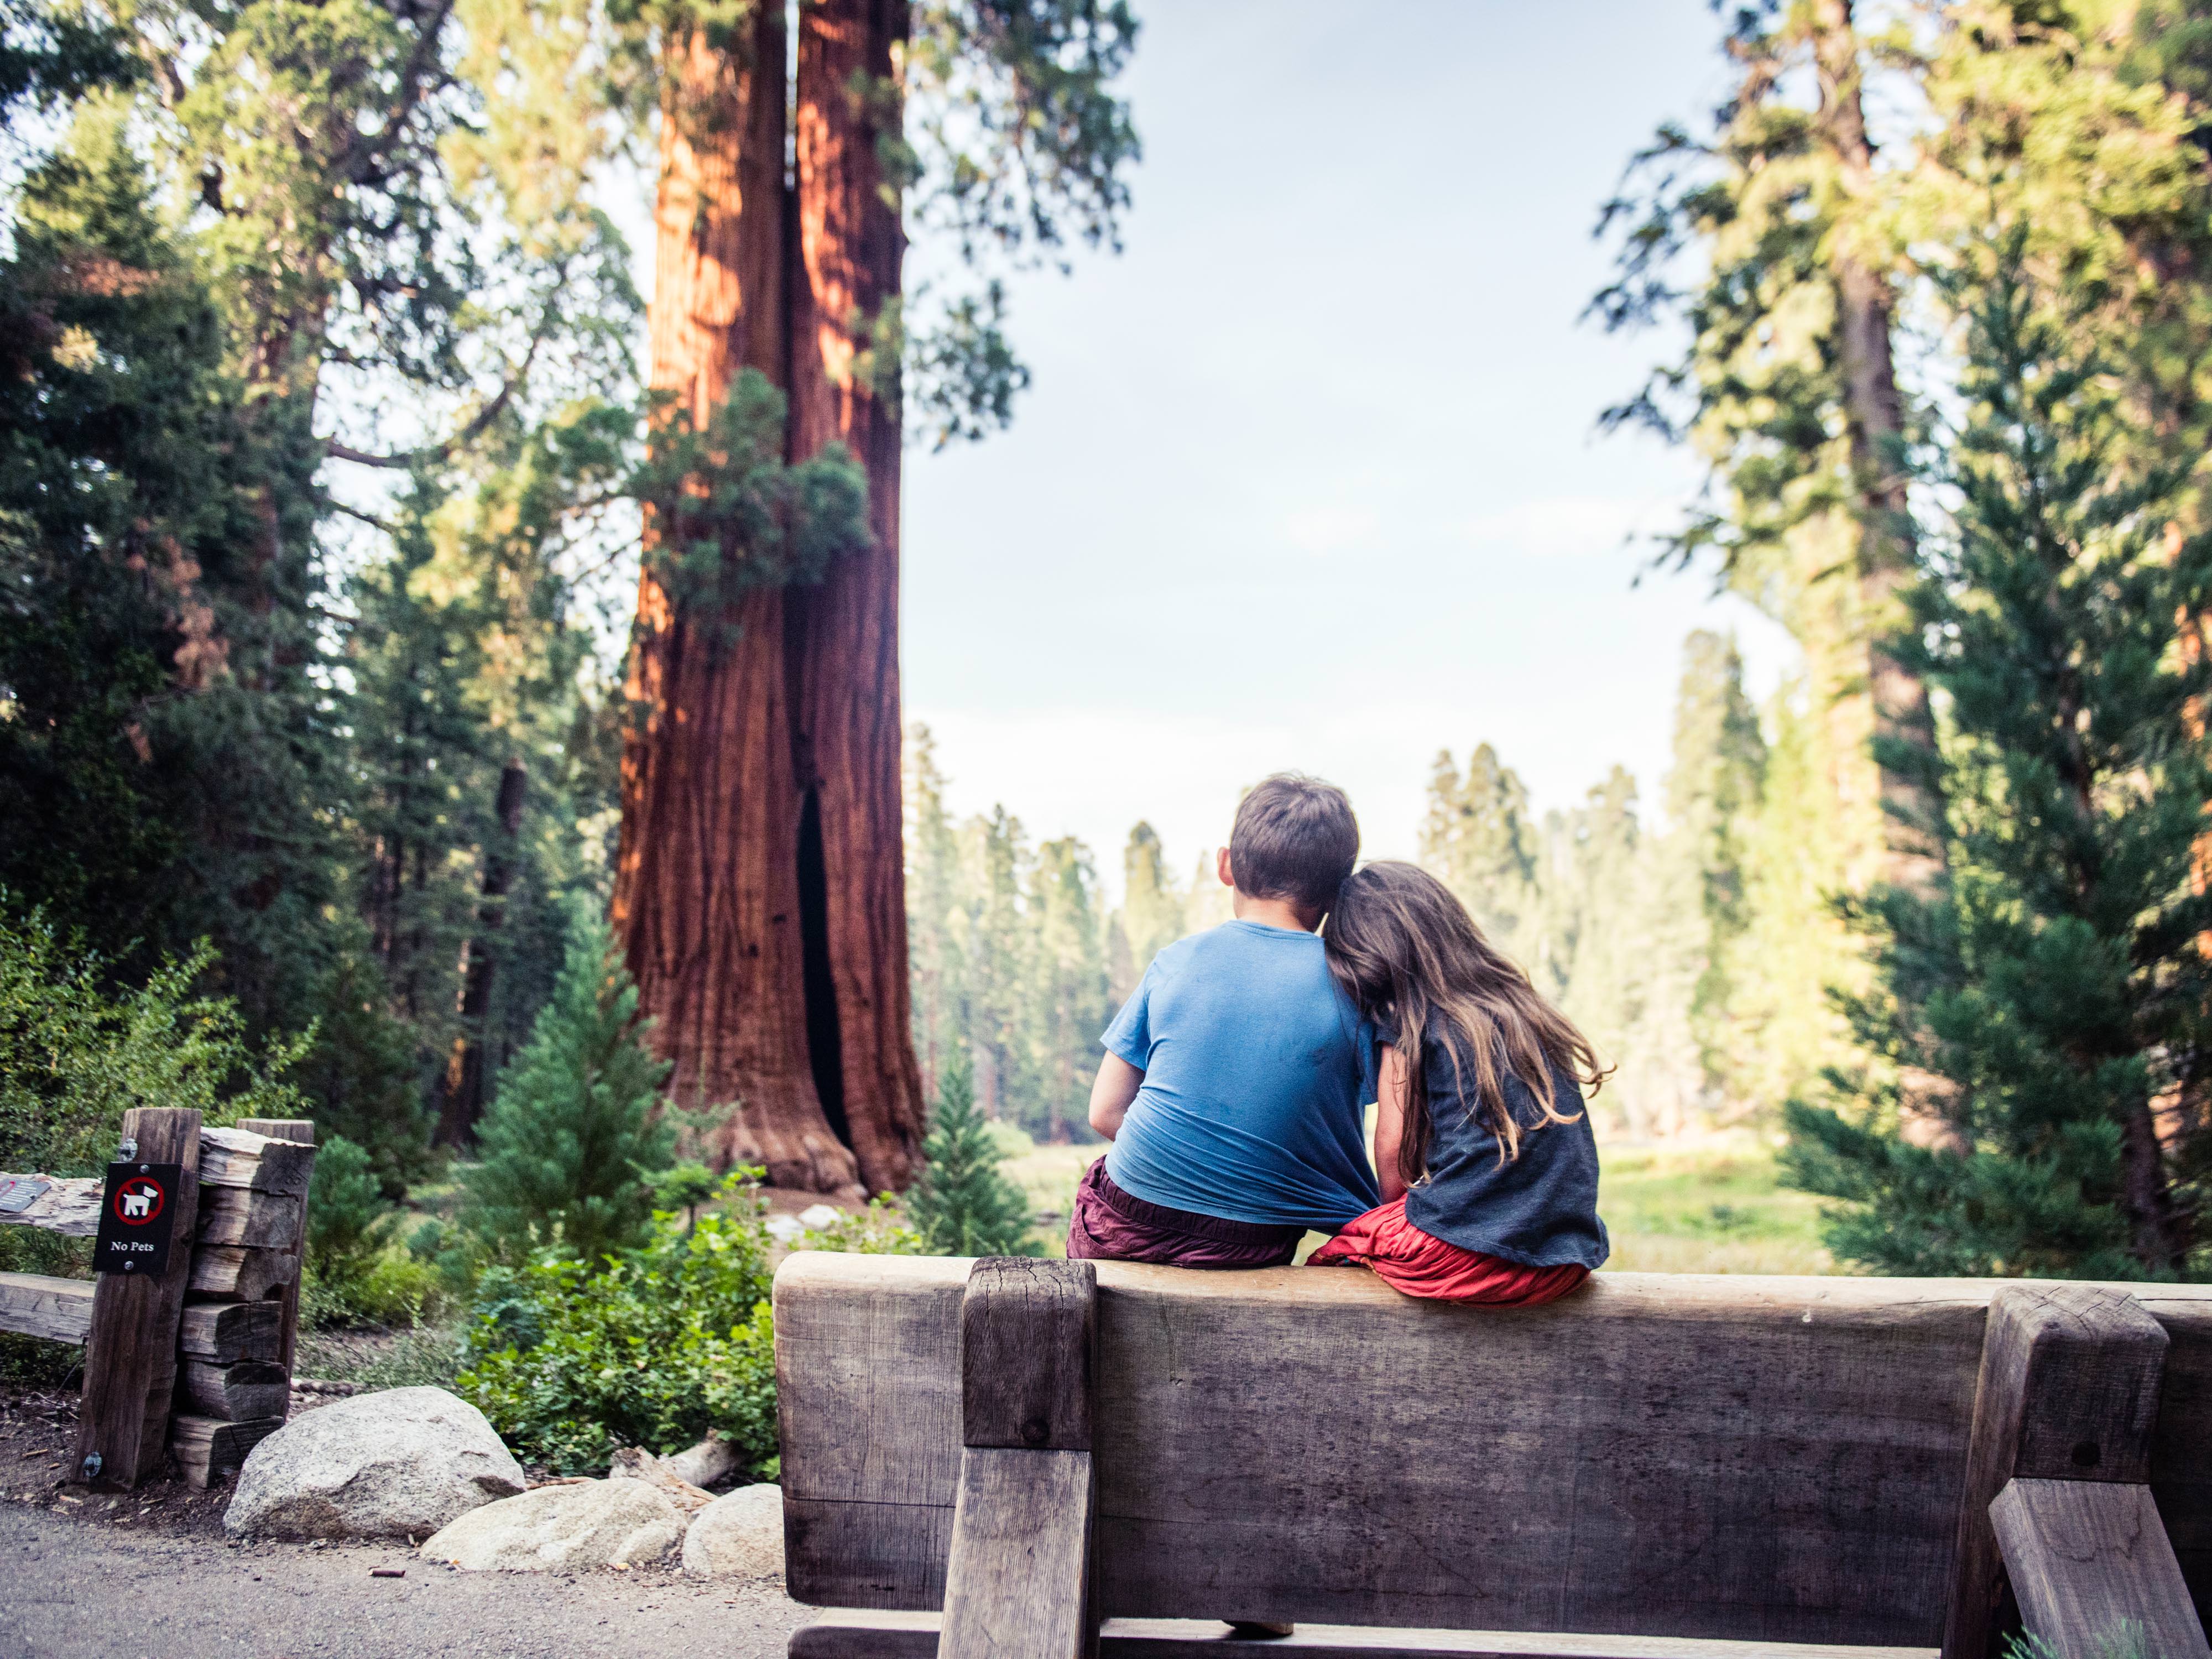 Two people sit on a bench in a forest.